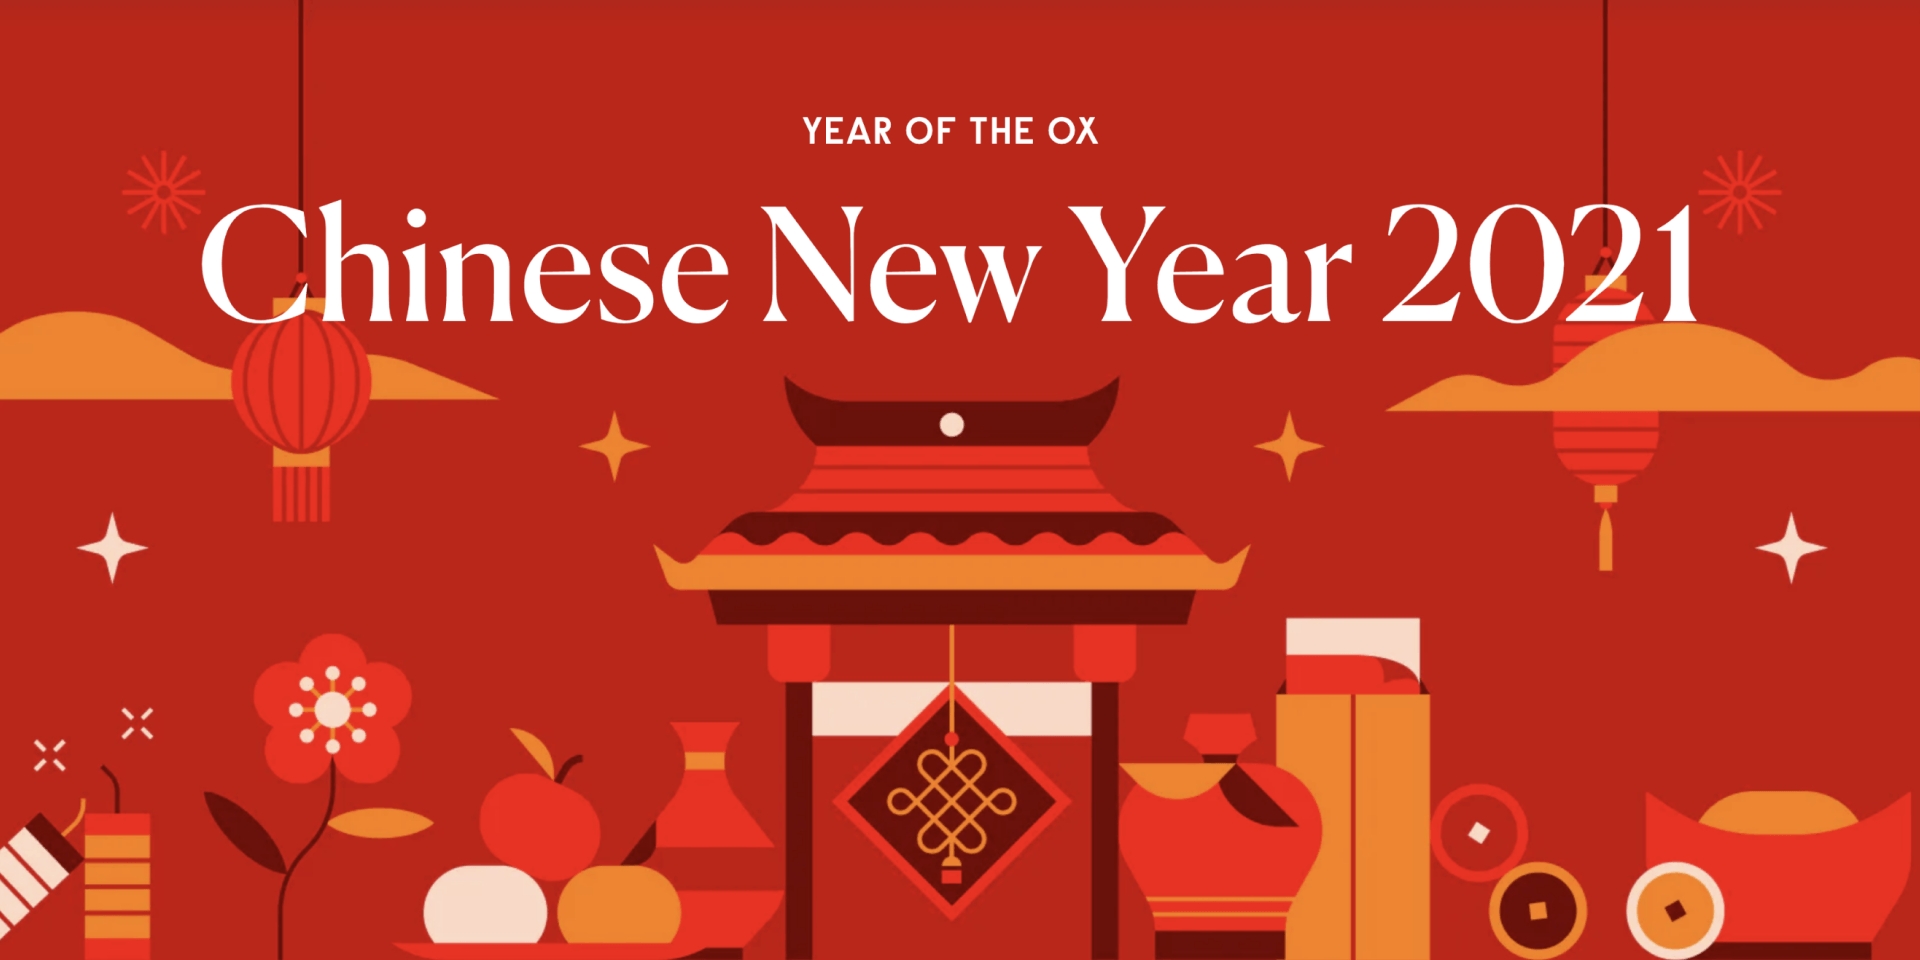 Chinese New Year 2021 - Year Of The Ox